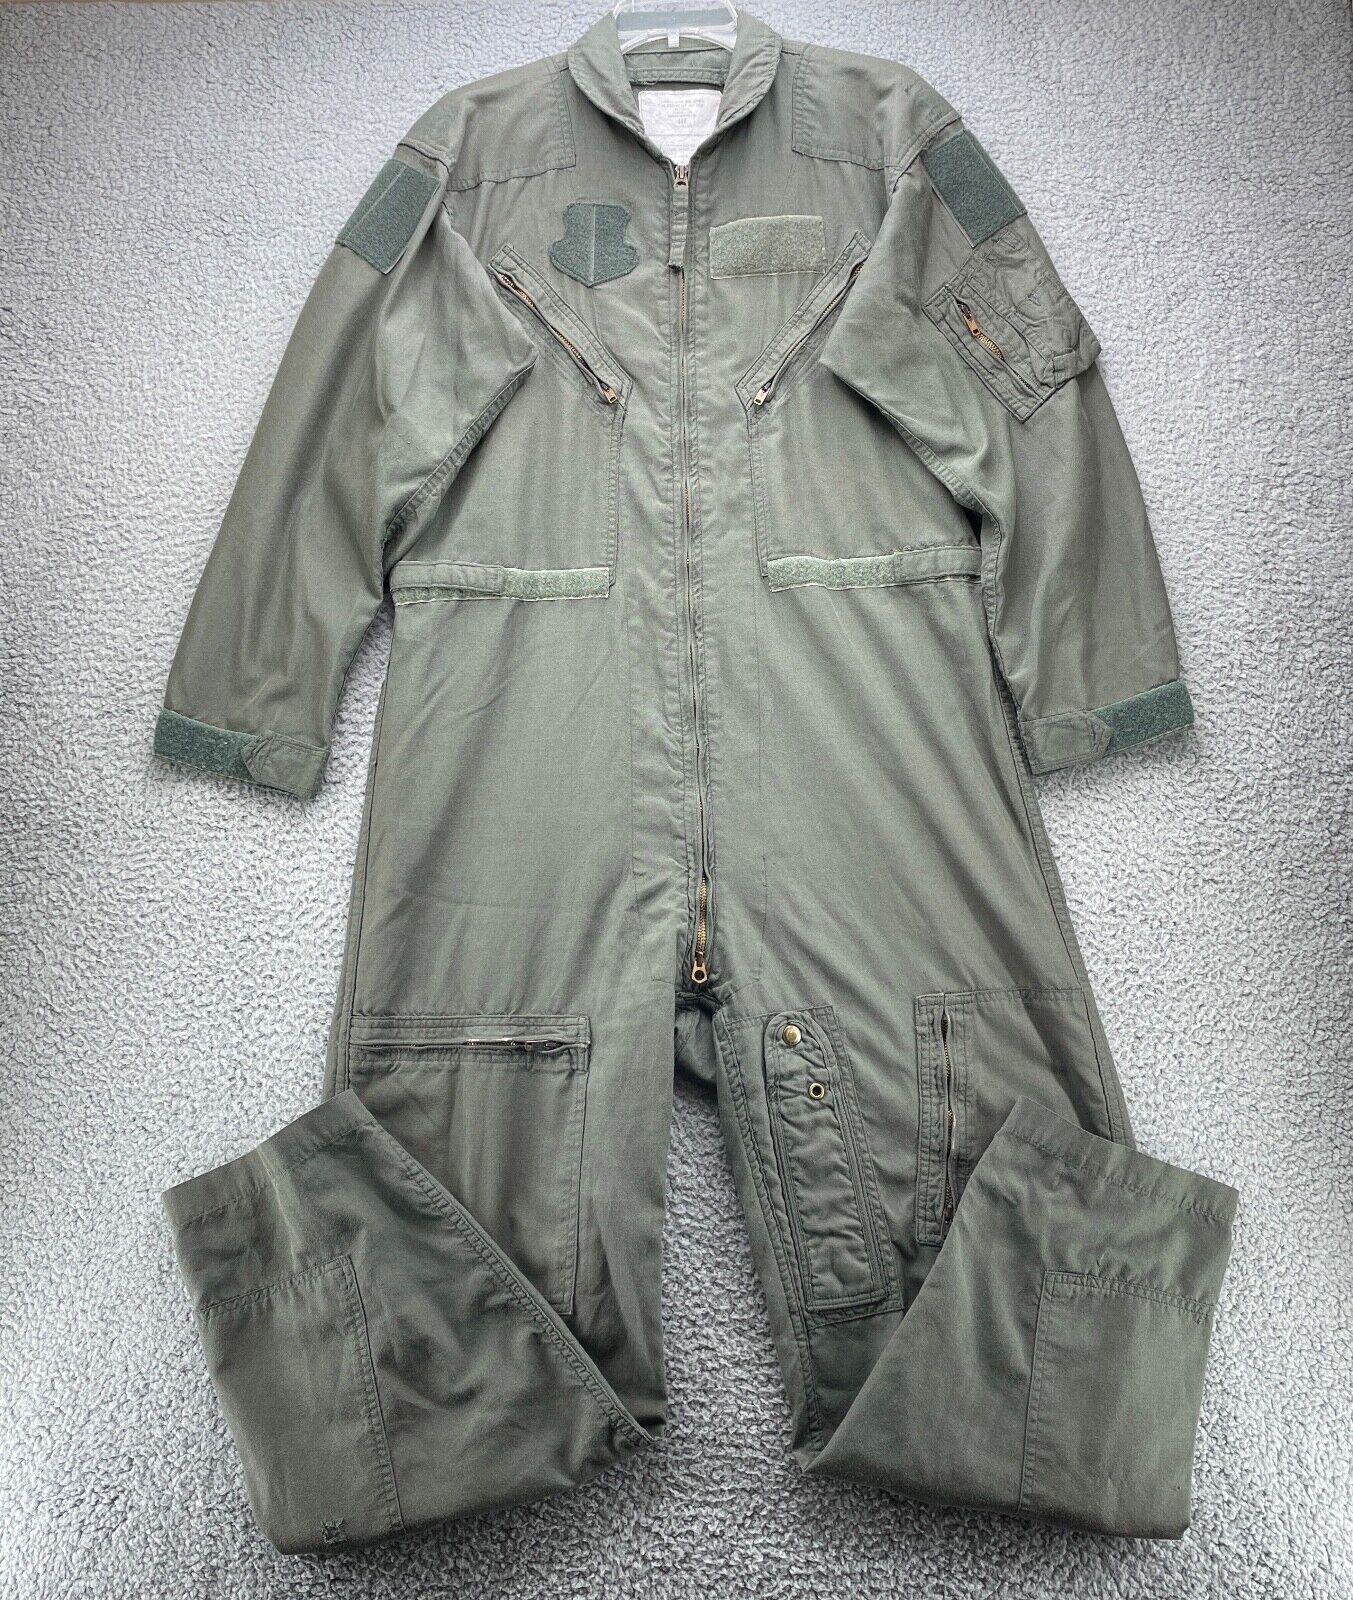 USAF US Military CWU-27/P Flyers Coveralls Flight Suit Olive Green 44 R